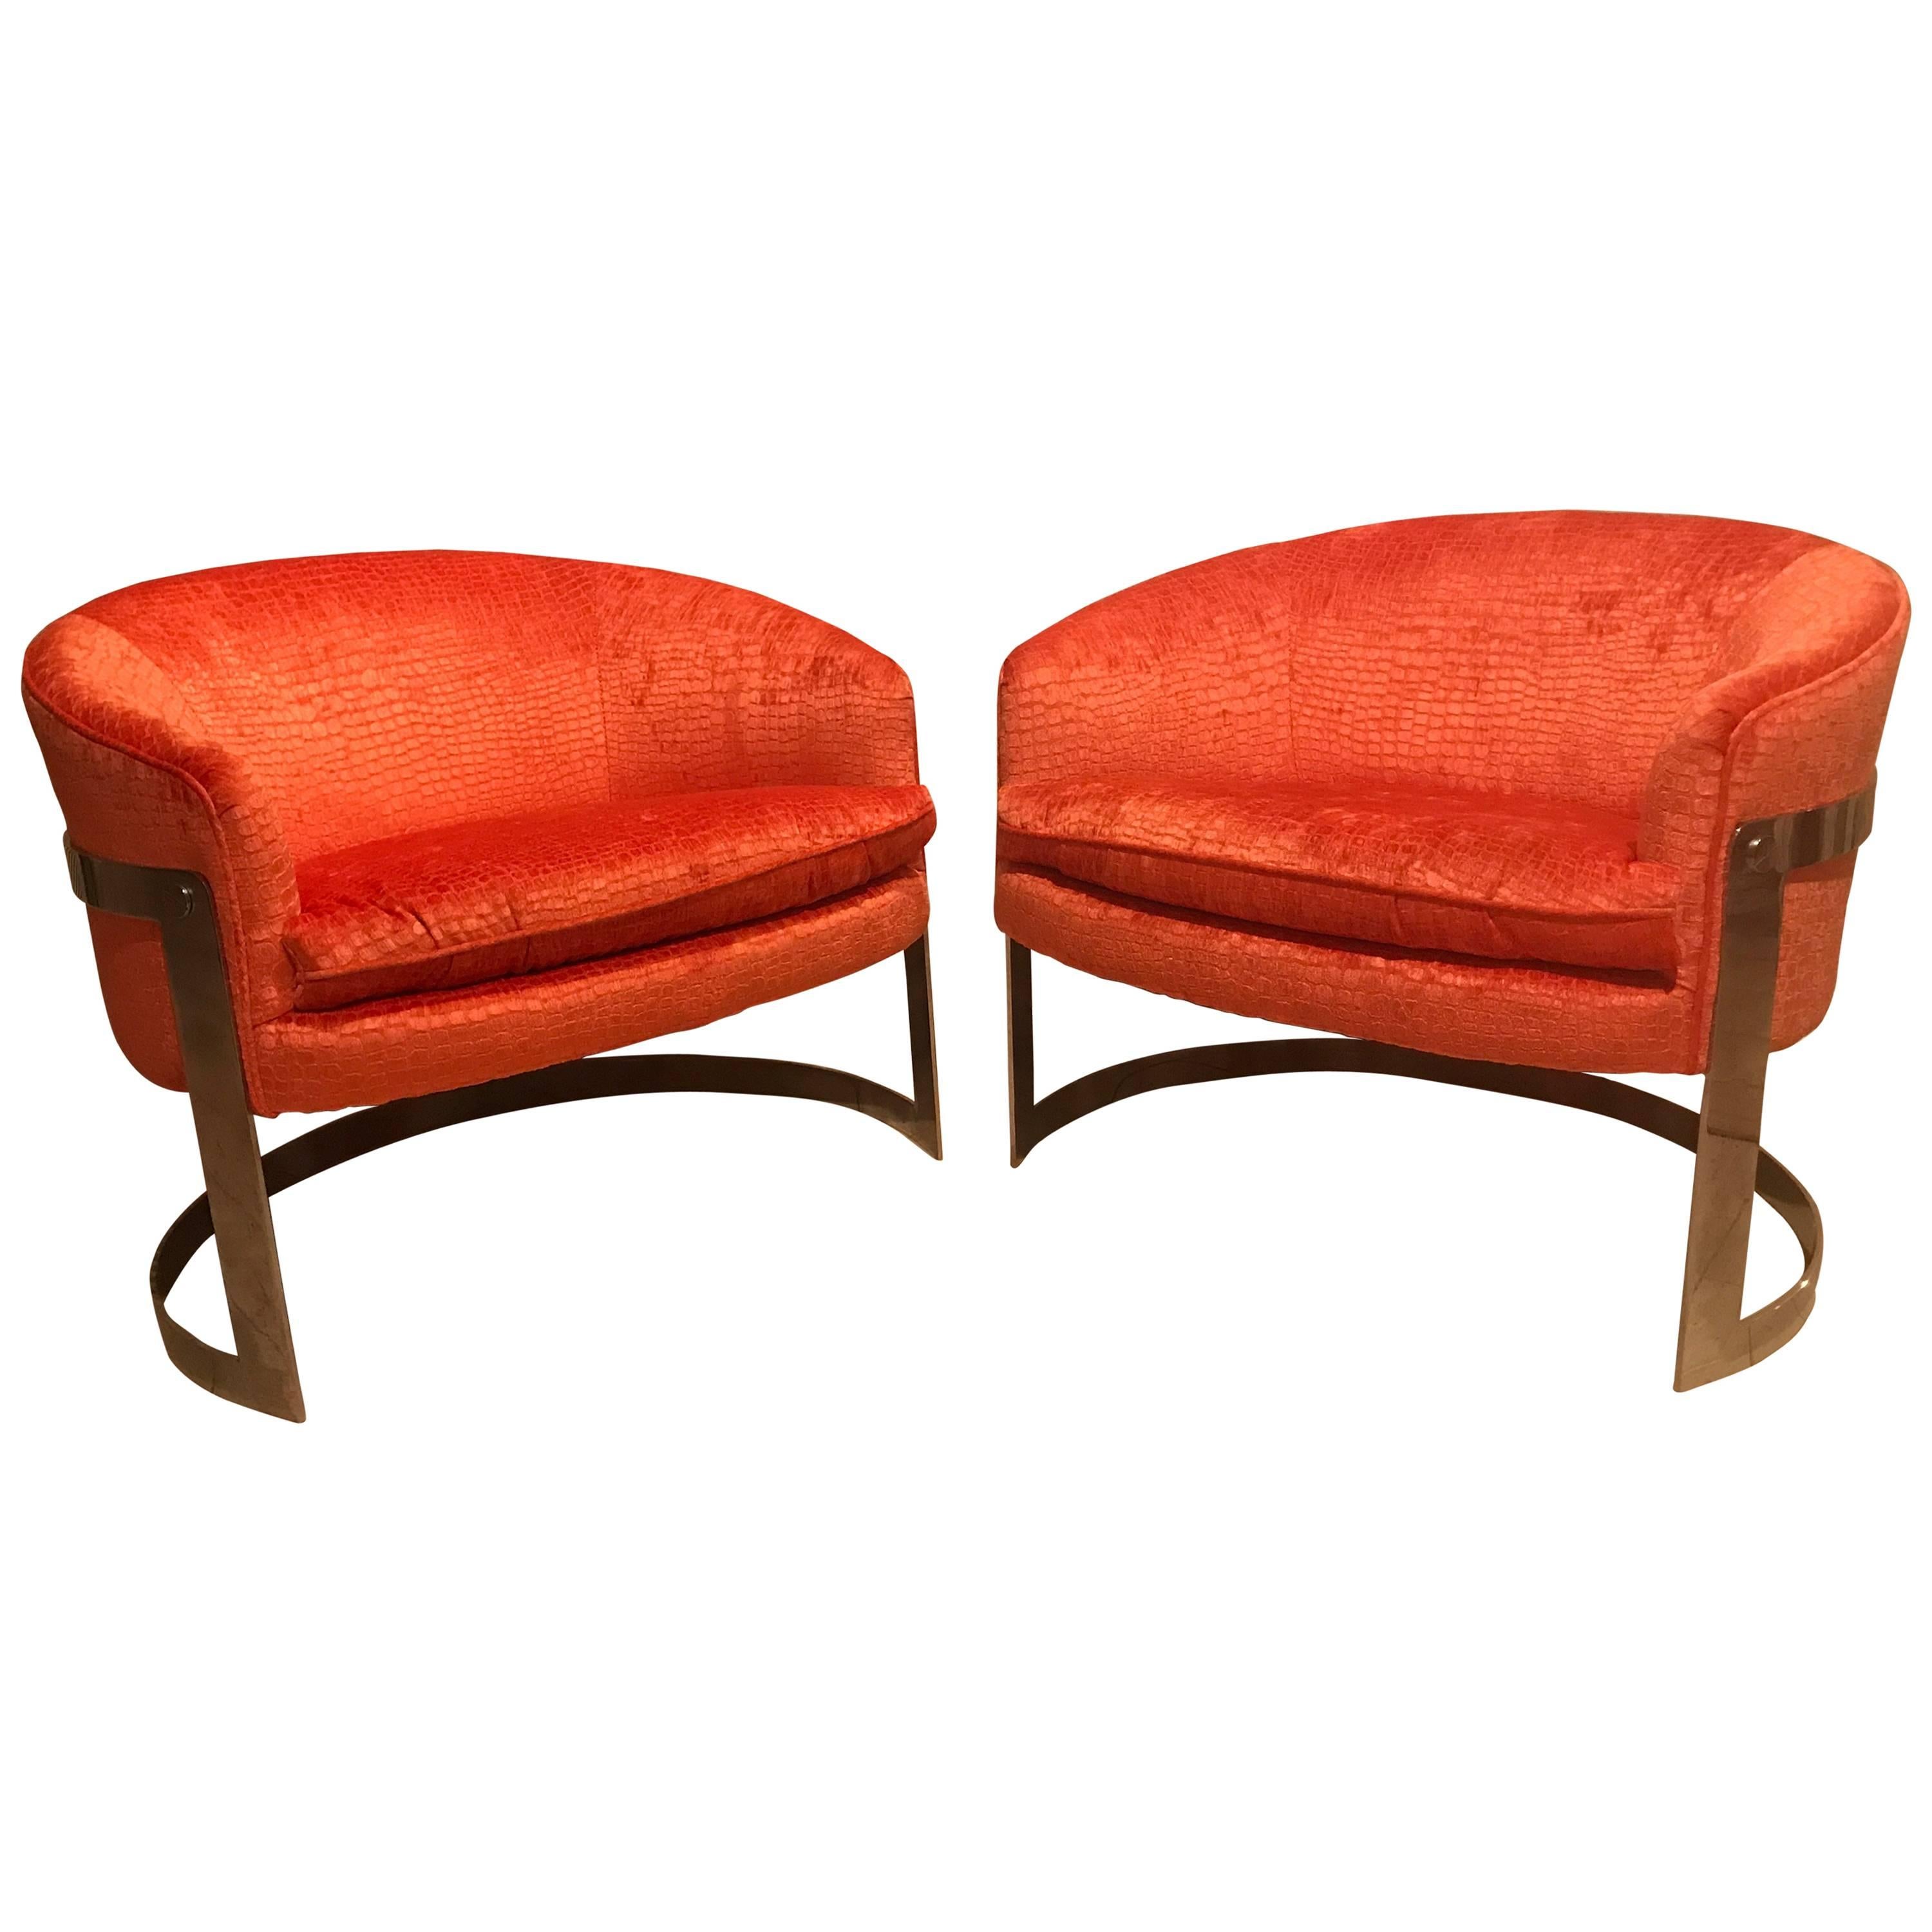 Pair of Exquisite Milo Baughman Chrome Side Chairs in Faux Coral Alligator